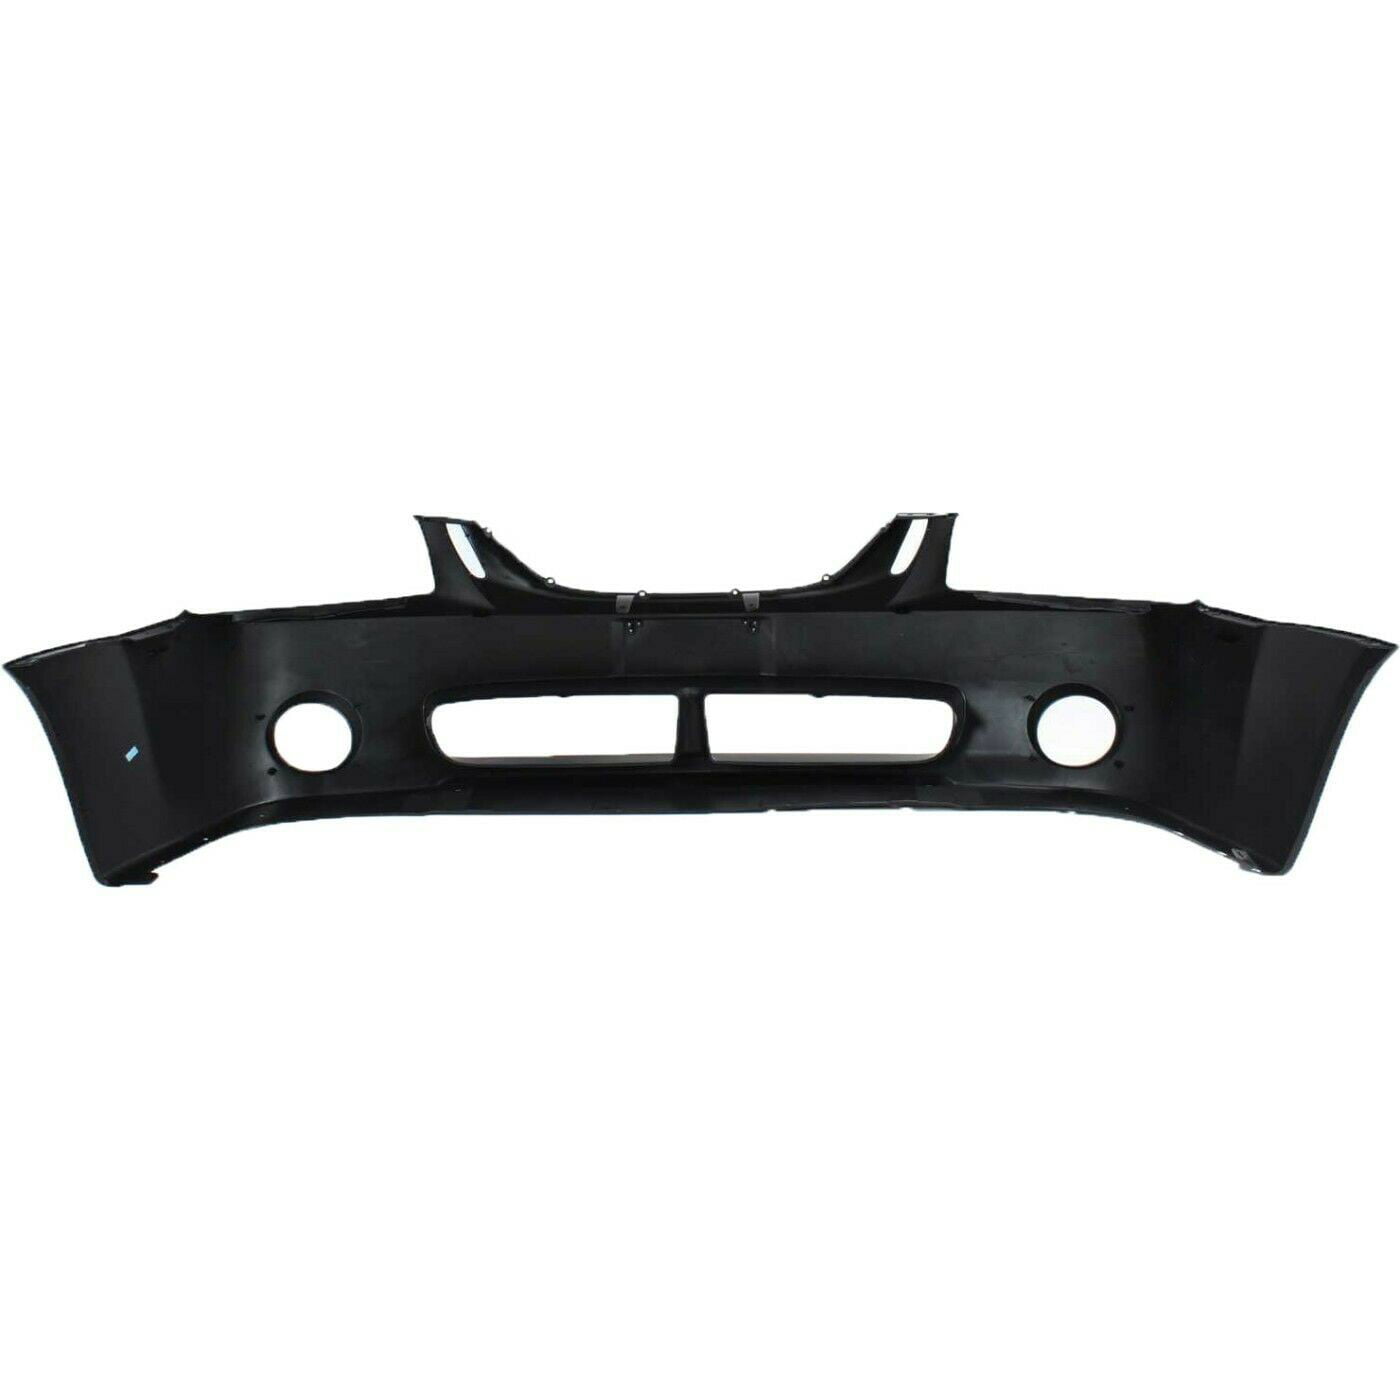 Front Bumper Cover For 2004 2005 2006 Kia Spectra Spectra5 w Fog Light holes 